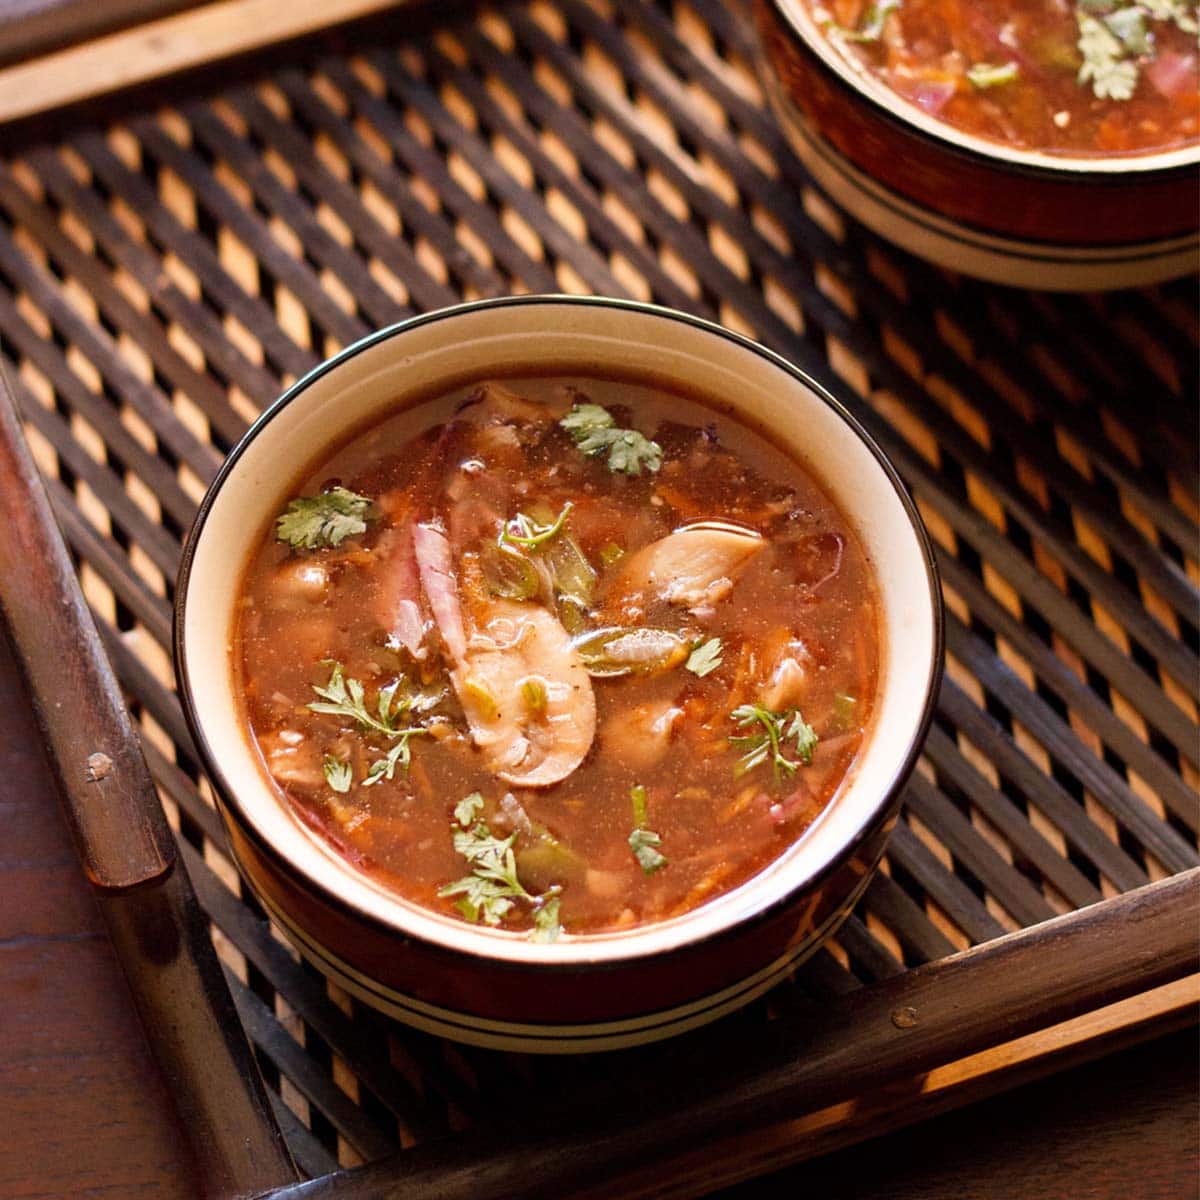 veg hot and sour soup in a black rimmed bowl or a dark brown bamboo tray